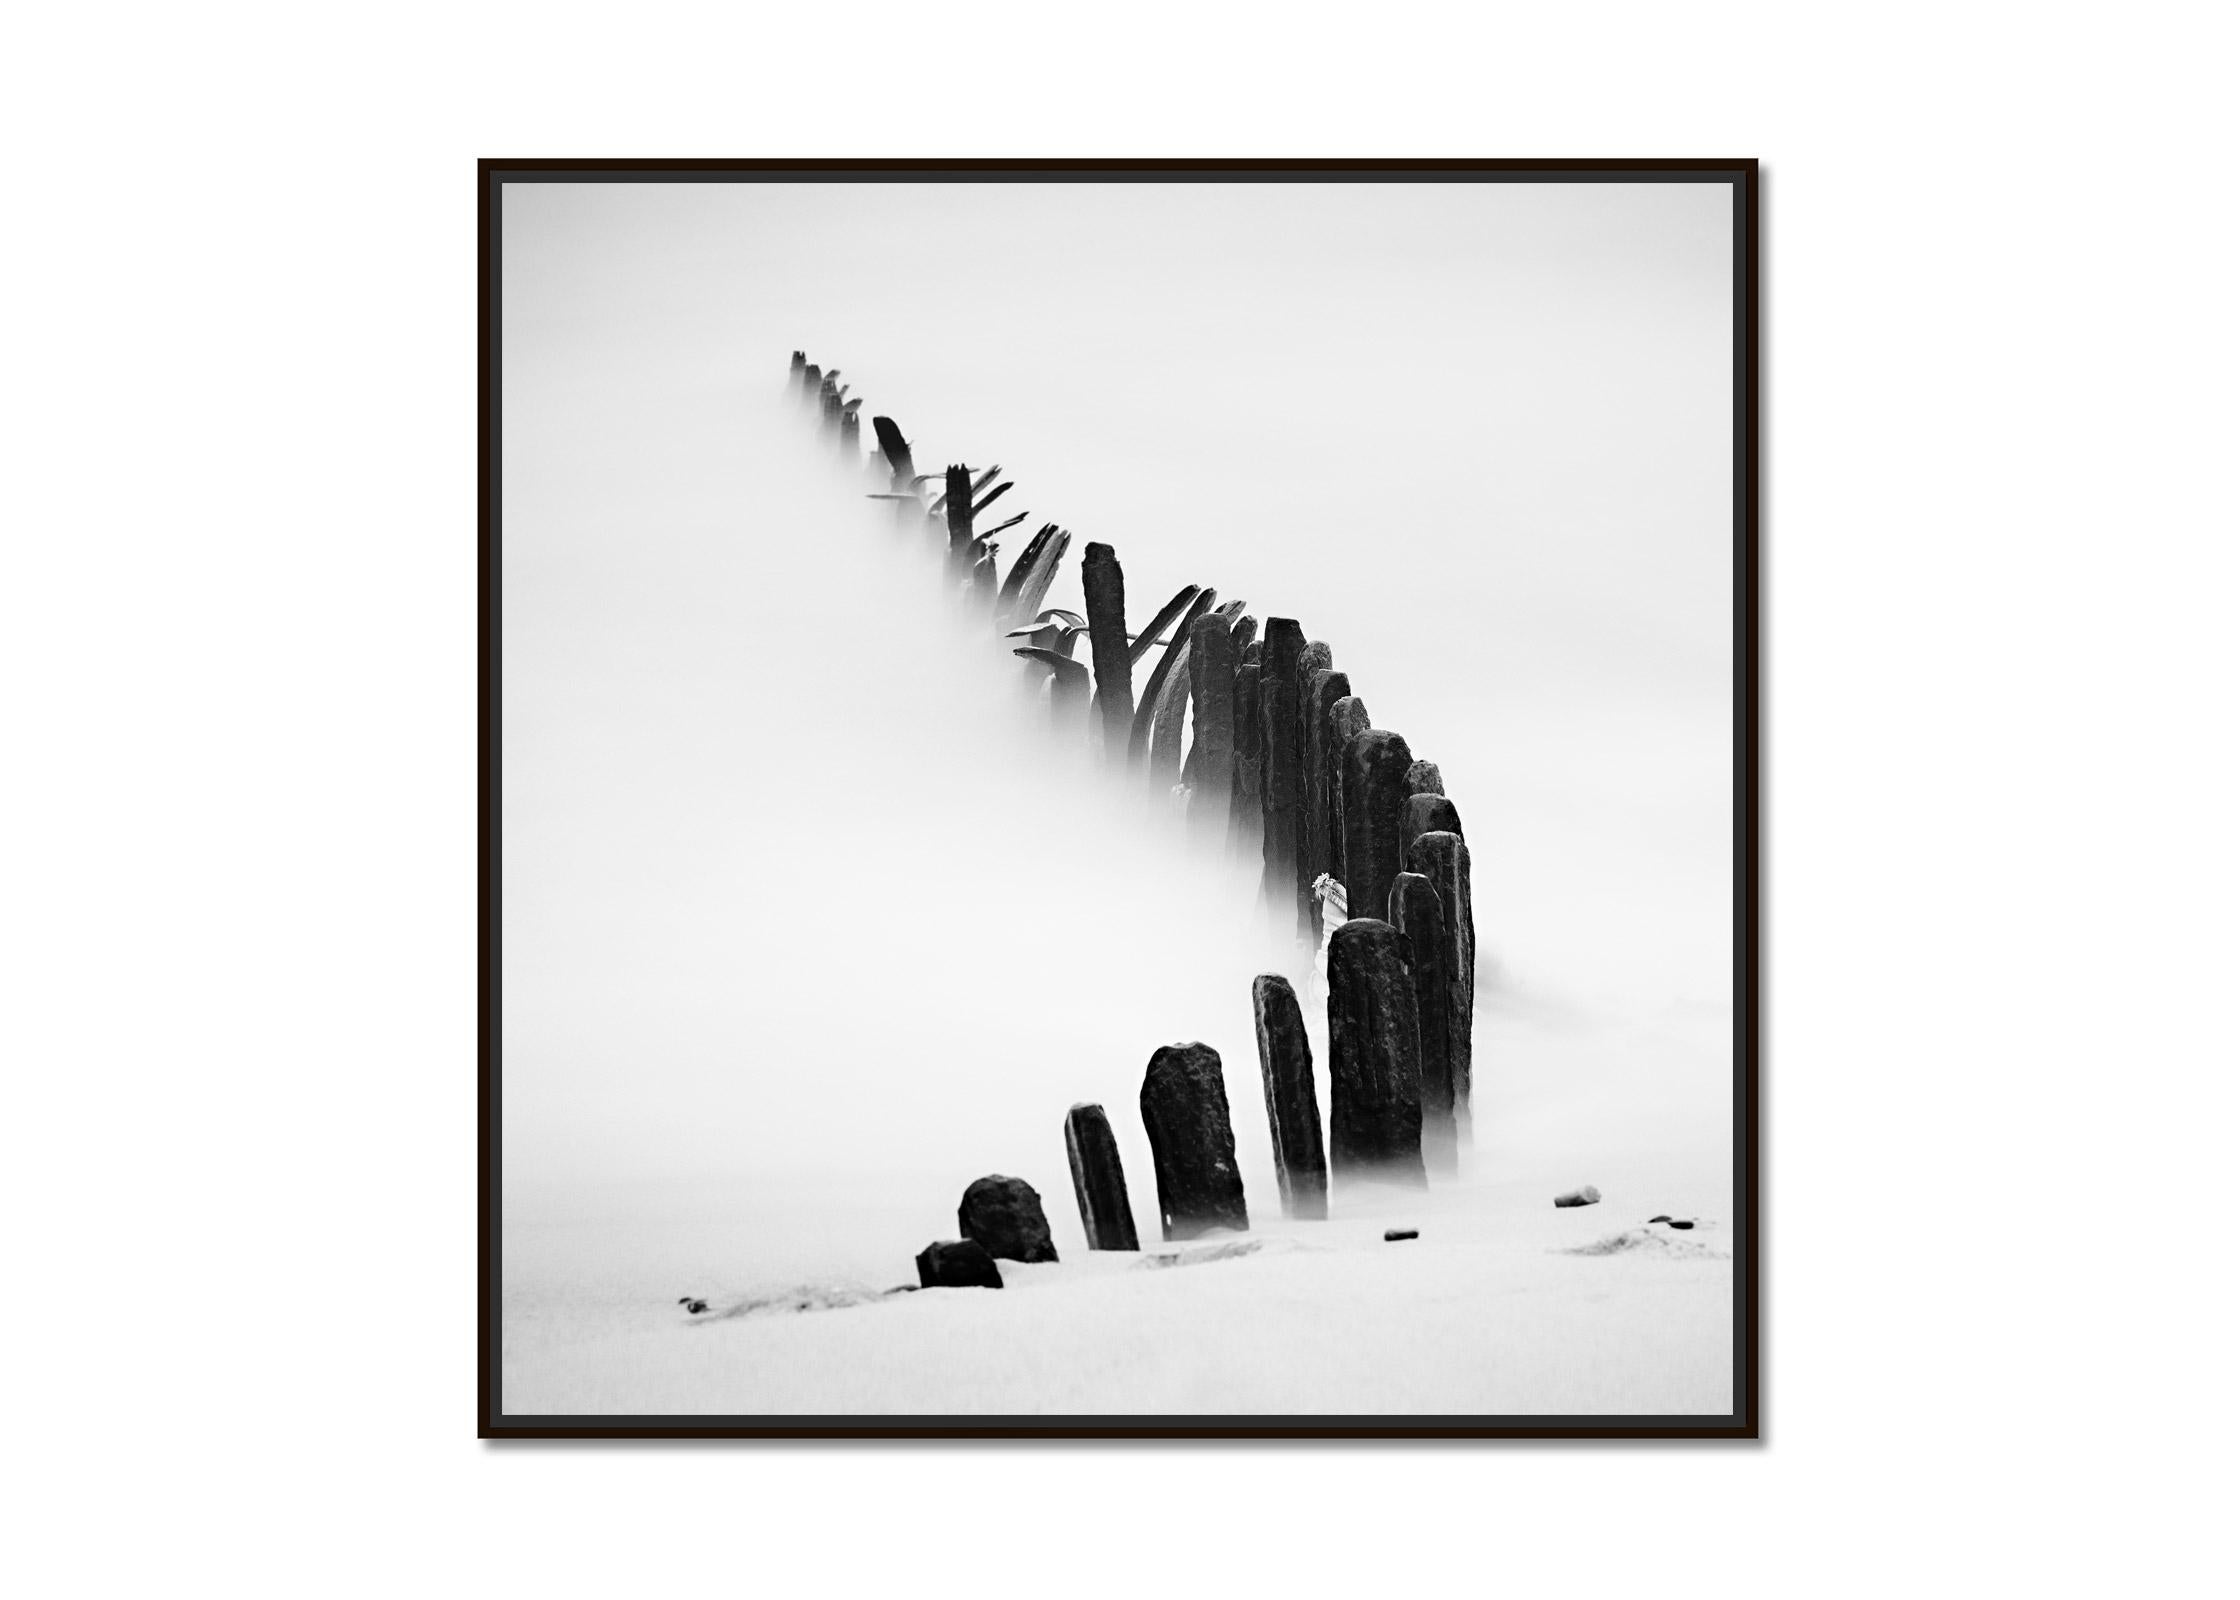 Curved Line, Sylt, Germany, black and white art photography, fine art landscape - Photograph by Gerald Berghammer